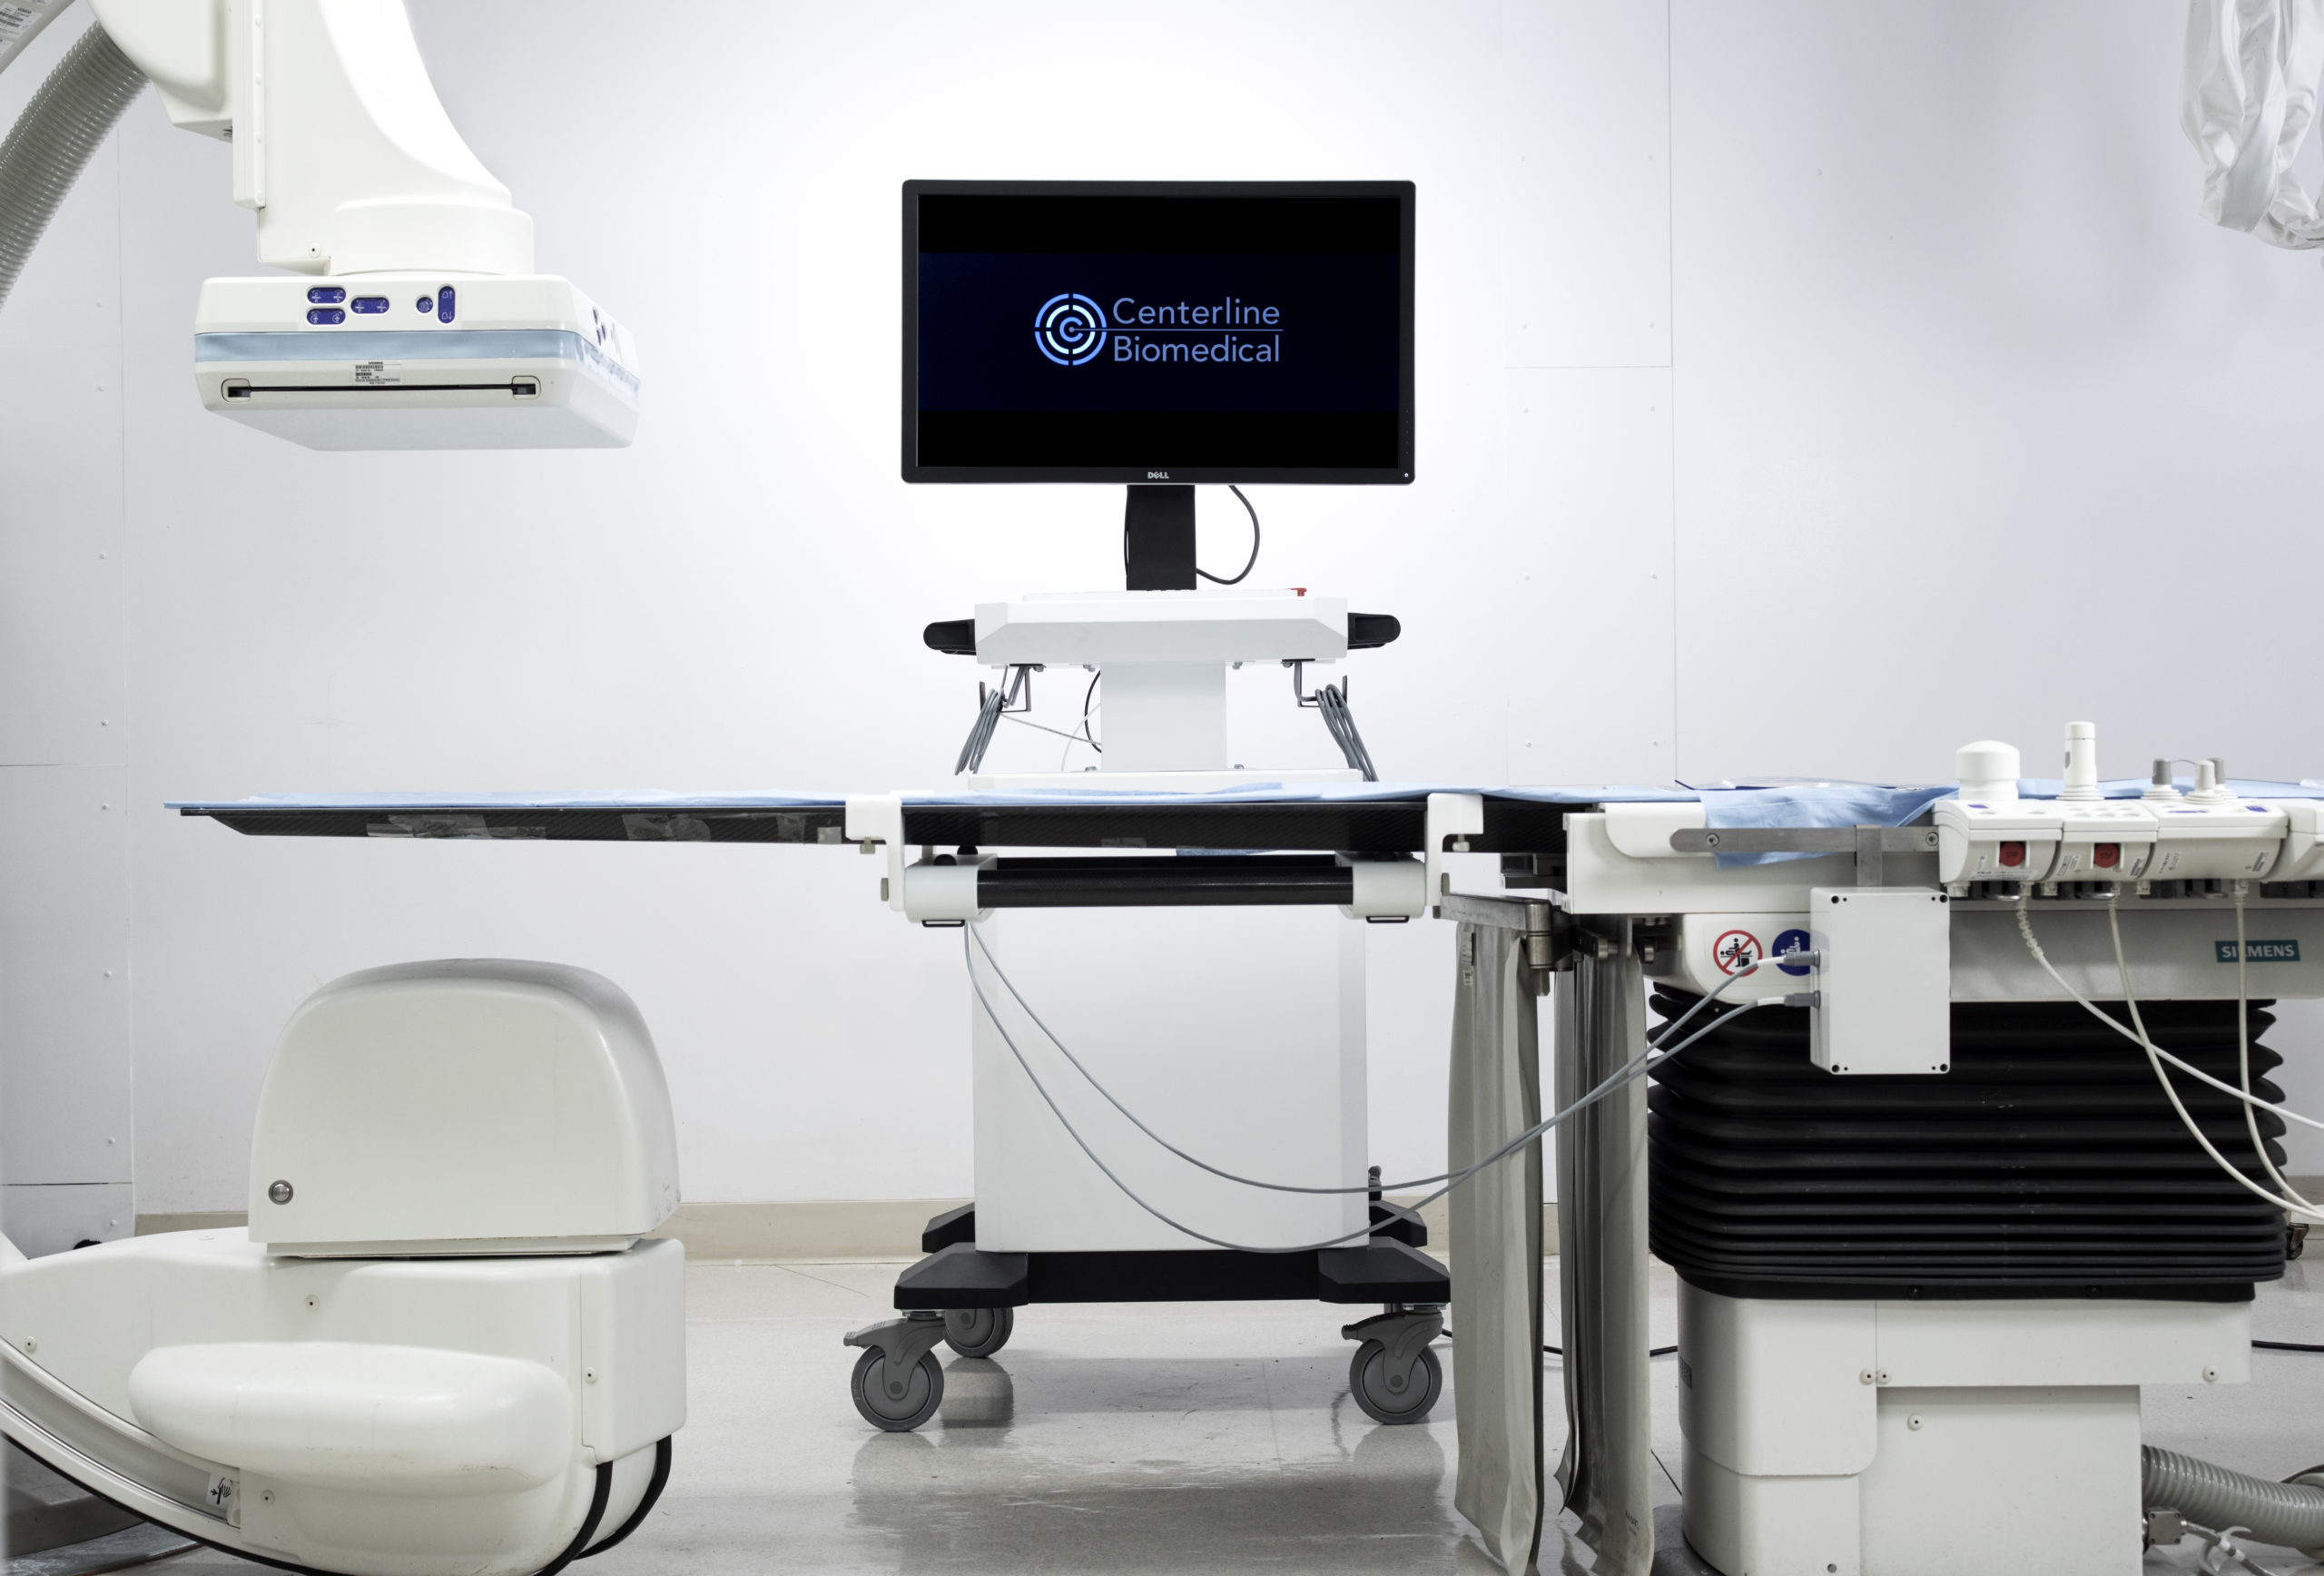 Centerline Biomedical Kicks Off First Clinical Study of Intra-Operative Positioning System Technology